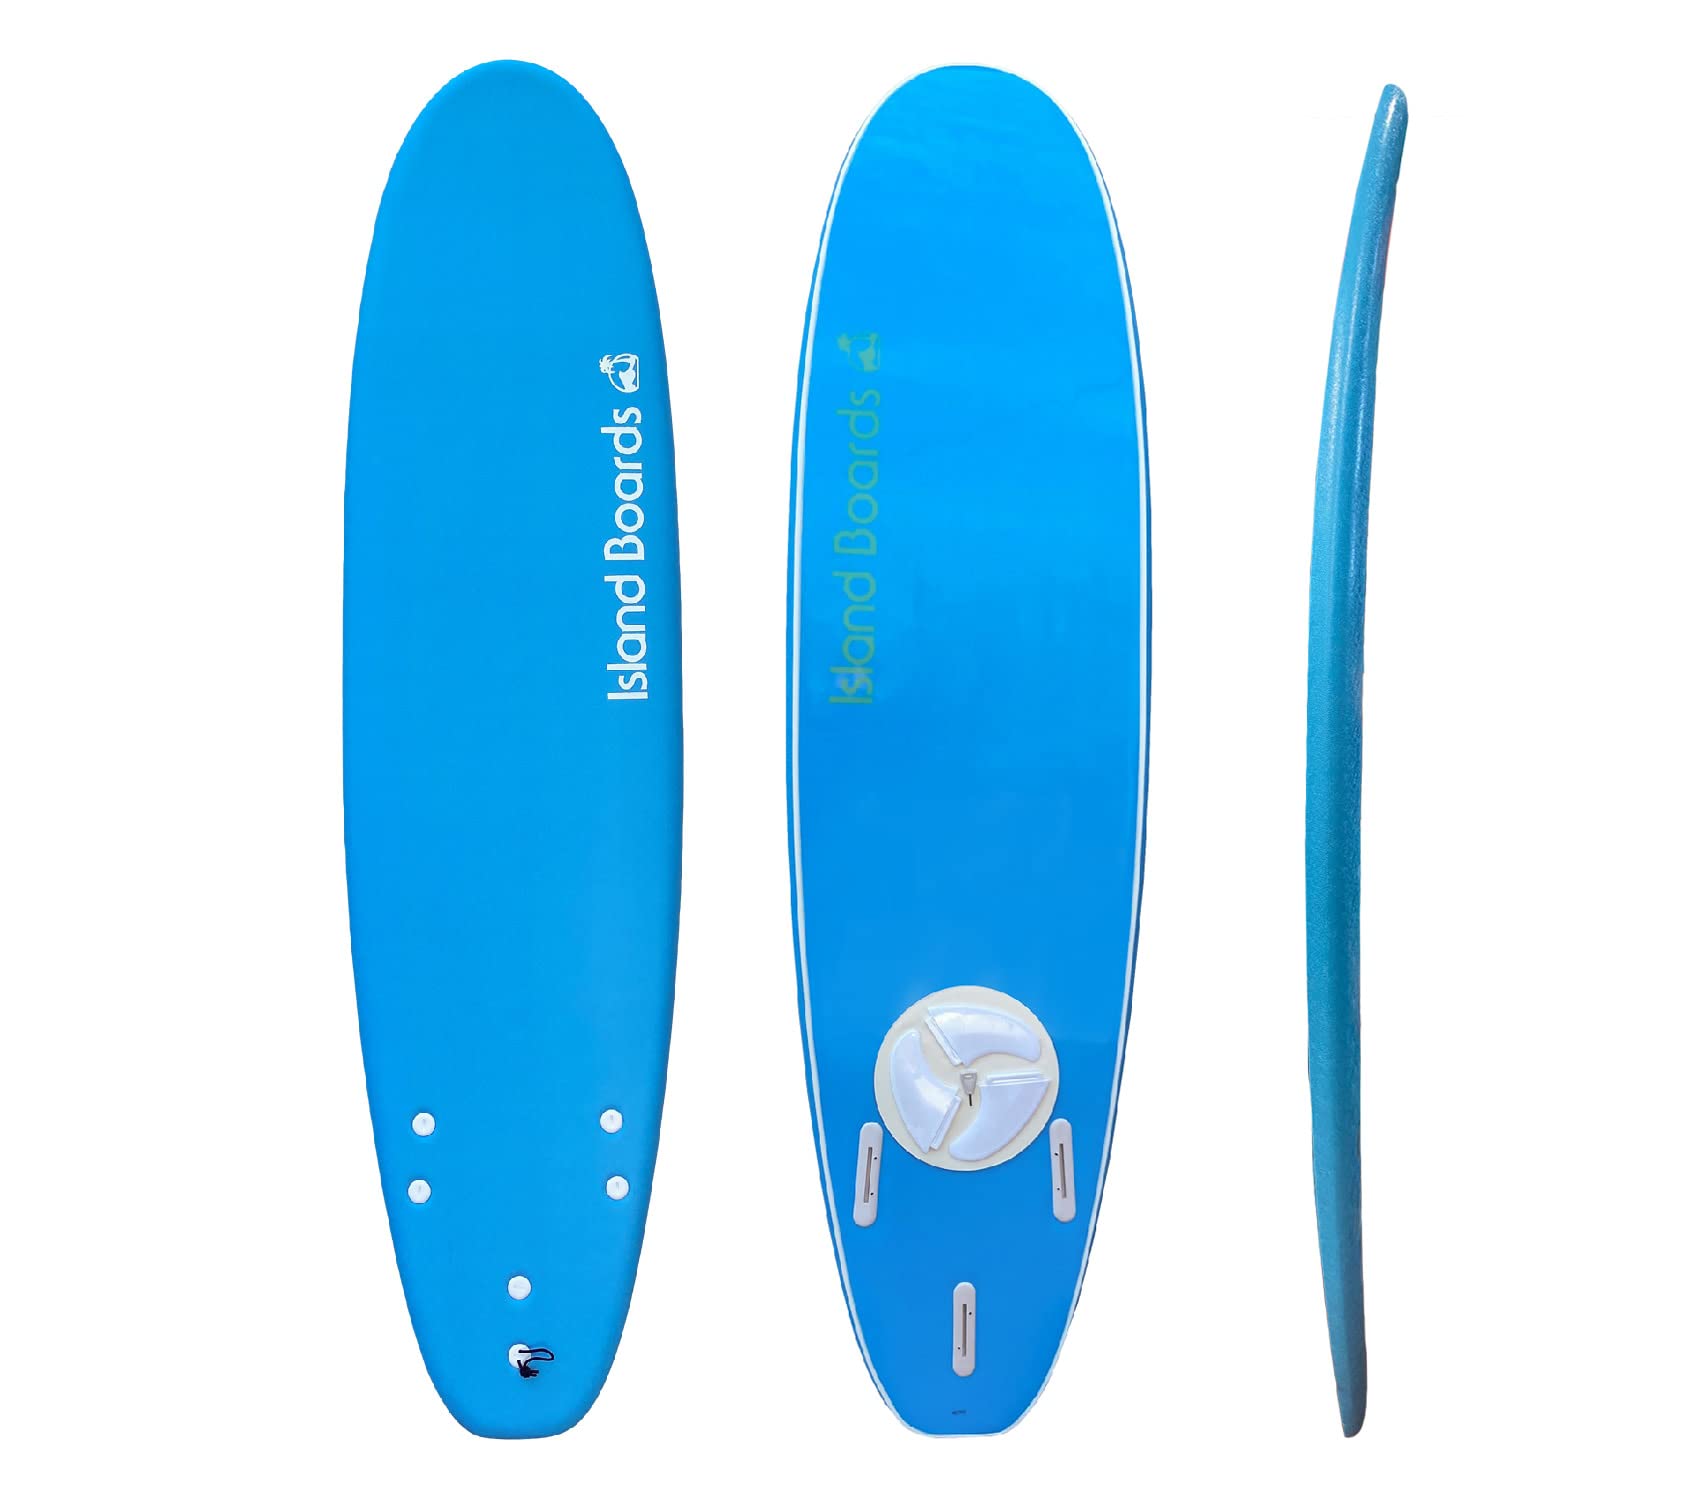 Island Water Sports Classic Softtop Surfboard Azure Blue-Azure Blue 8ft0in